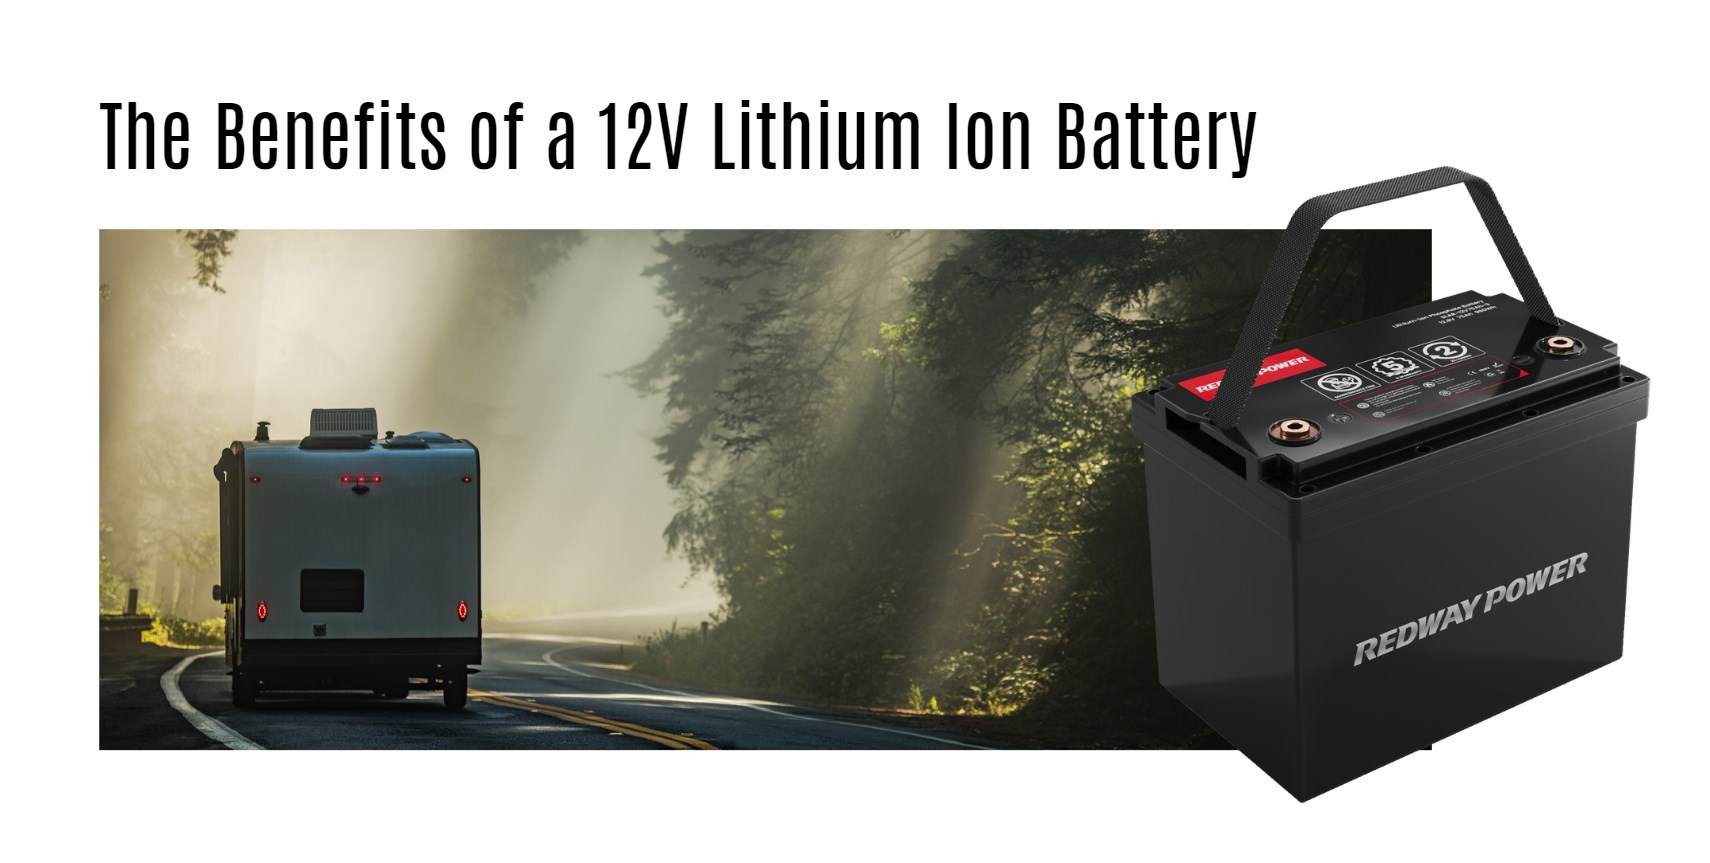 The Benefits of a 12V Lithium Ion Battery. 12v 100ah rv lithium battery factory oem manufacturer marine boat
